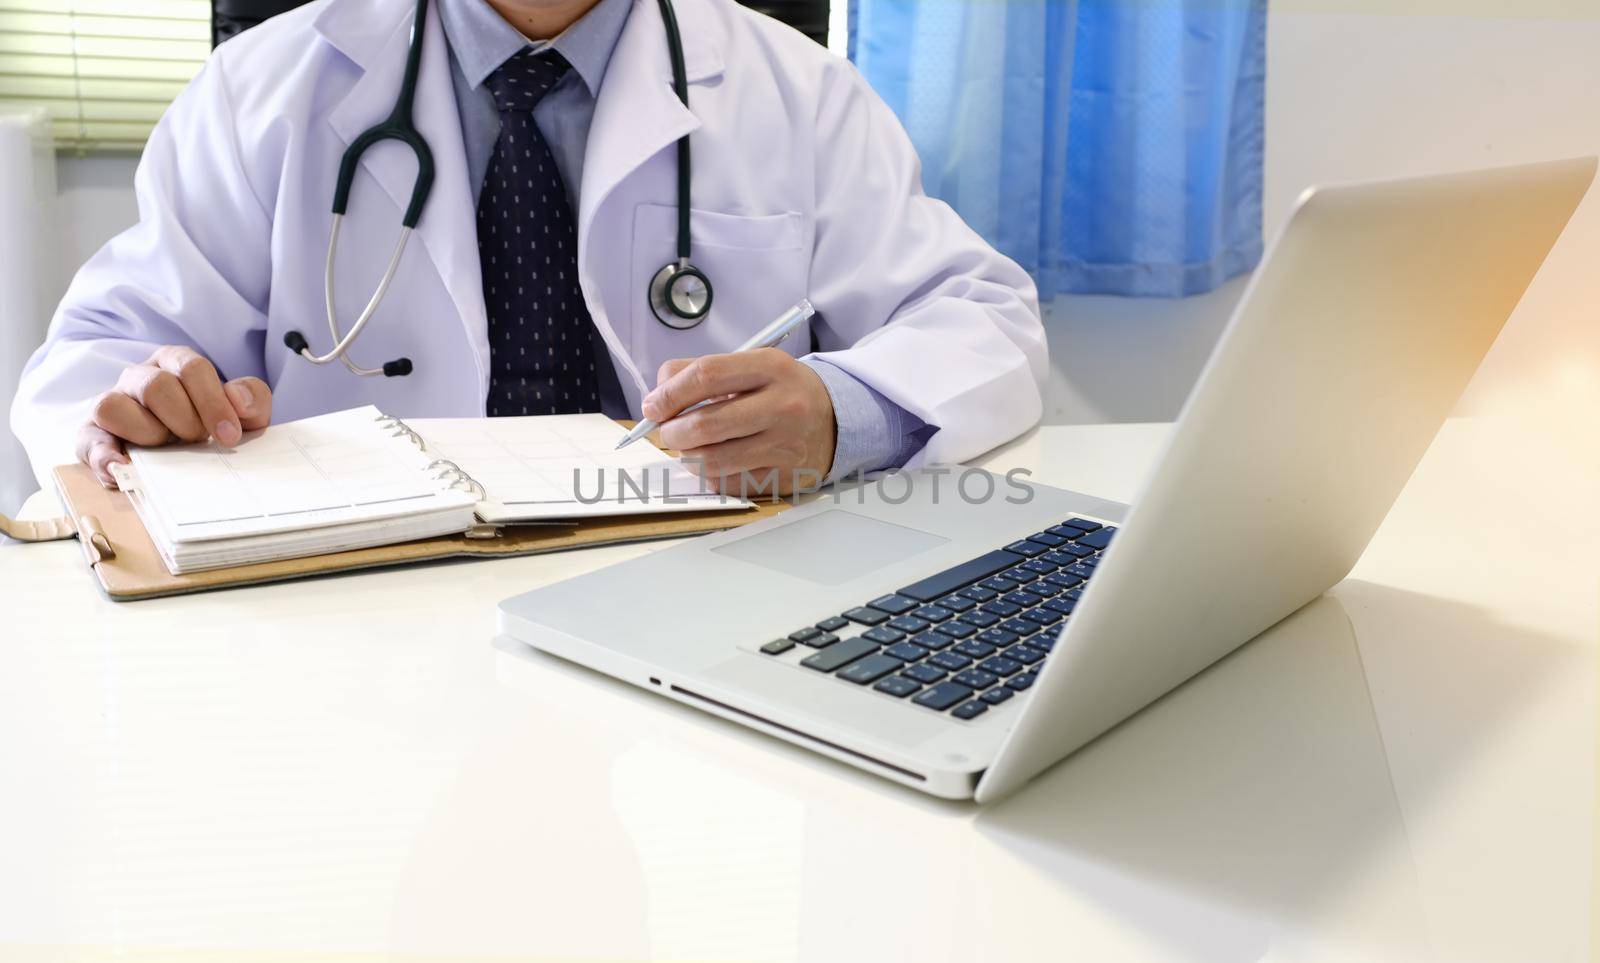 Midsection of Doctor With Arms Crossed Holding Stethoscope with copy space. Healthcare and medical concept.